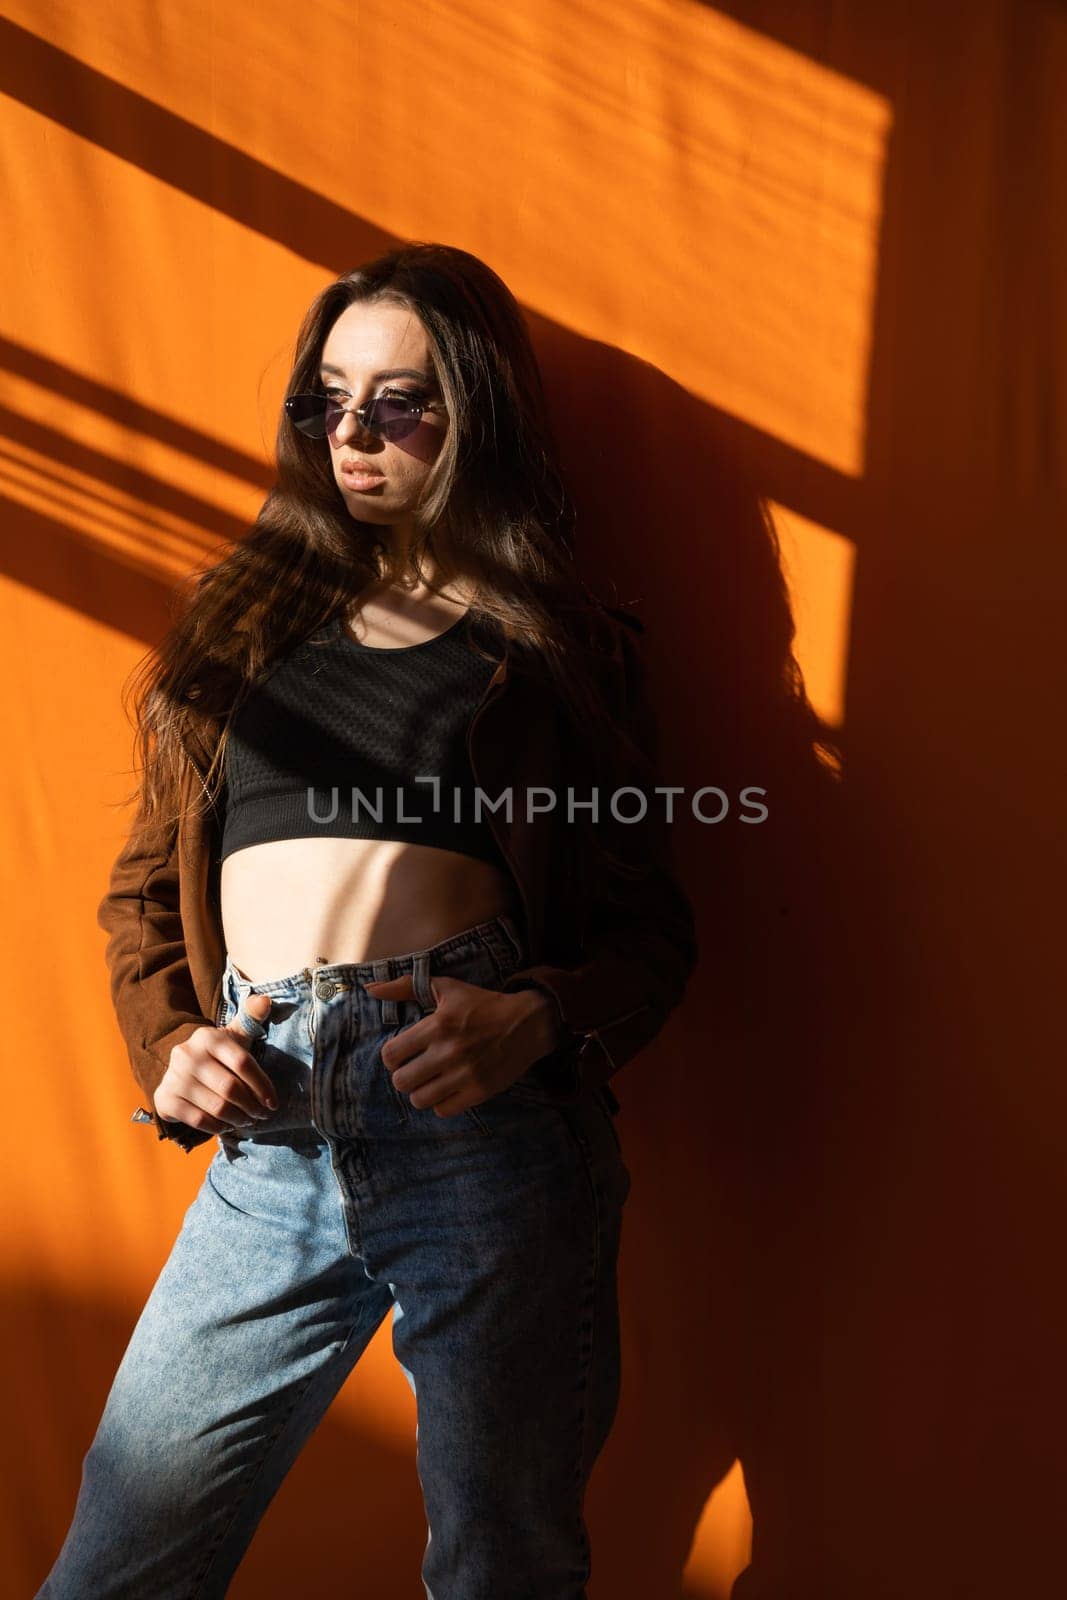 brunette with sunglasses standing on an orange background in sunset light